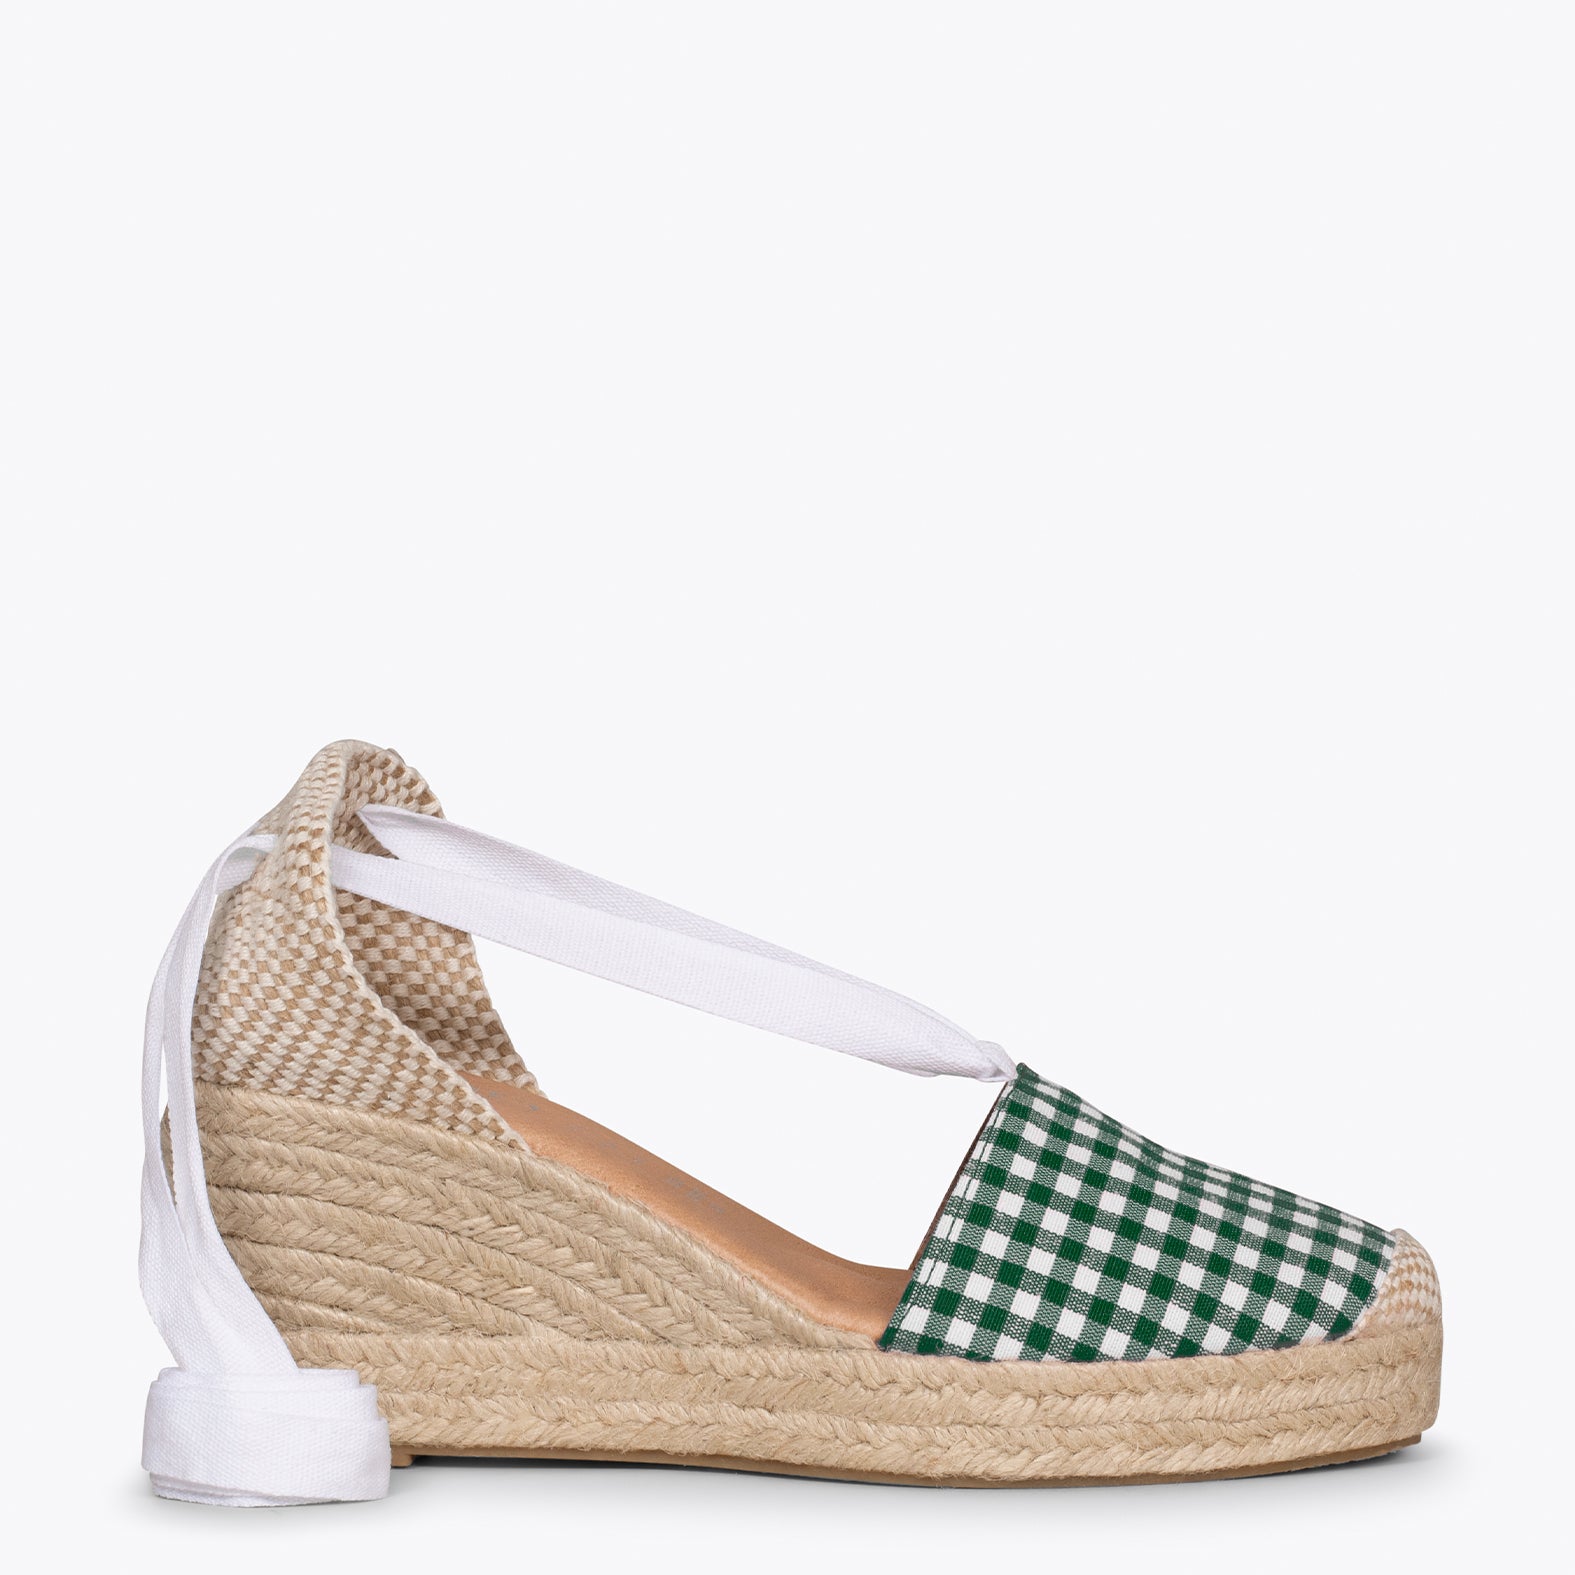 VERA – GREEN VICHY espadrilles with laces